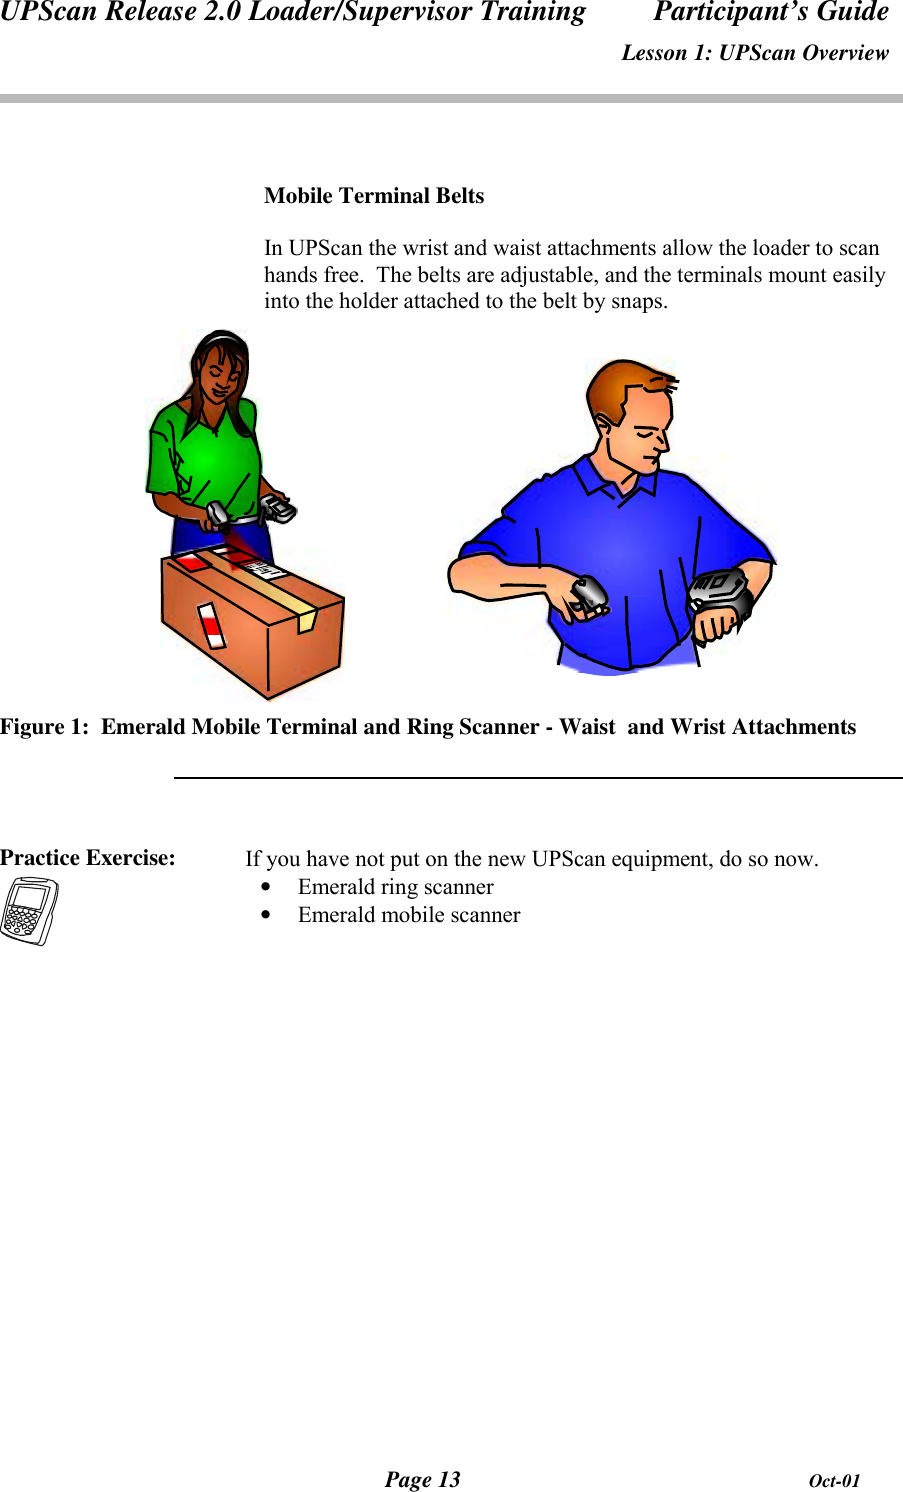 UPScan Release 2.0 Loader/Supervisor Training Participant’s GuideLesson 1: UPScan OverviewPage 13 Oct-01Mobile Terminal BeltsIn UPScan the wrist and waist attachments allow the loader to scanhands free.  The belts are adjustable, and the terminals mount easilyinto the holder attached to the belt by snaps.Figure 1:  Emerald Mobile Terminal and Ring Scanner - Waist  and Wrist AttachmentsPractice Exercise: If you have not put on the new UPScan equipment, do so now.• Emerald ring scanner• Emerald mobile scanner